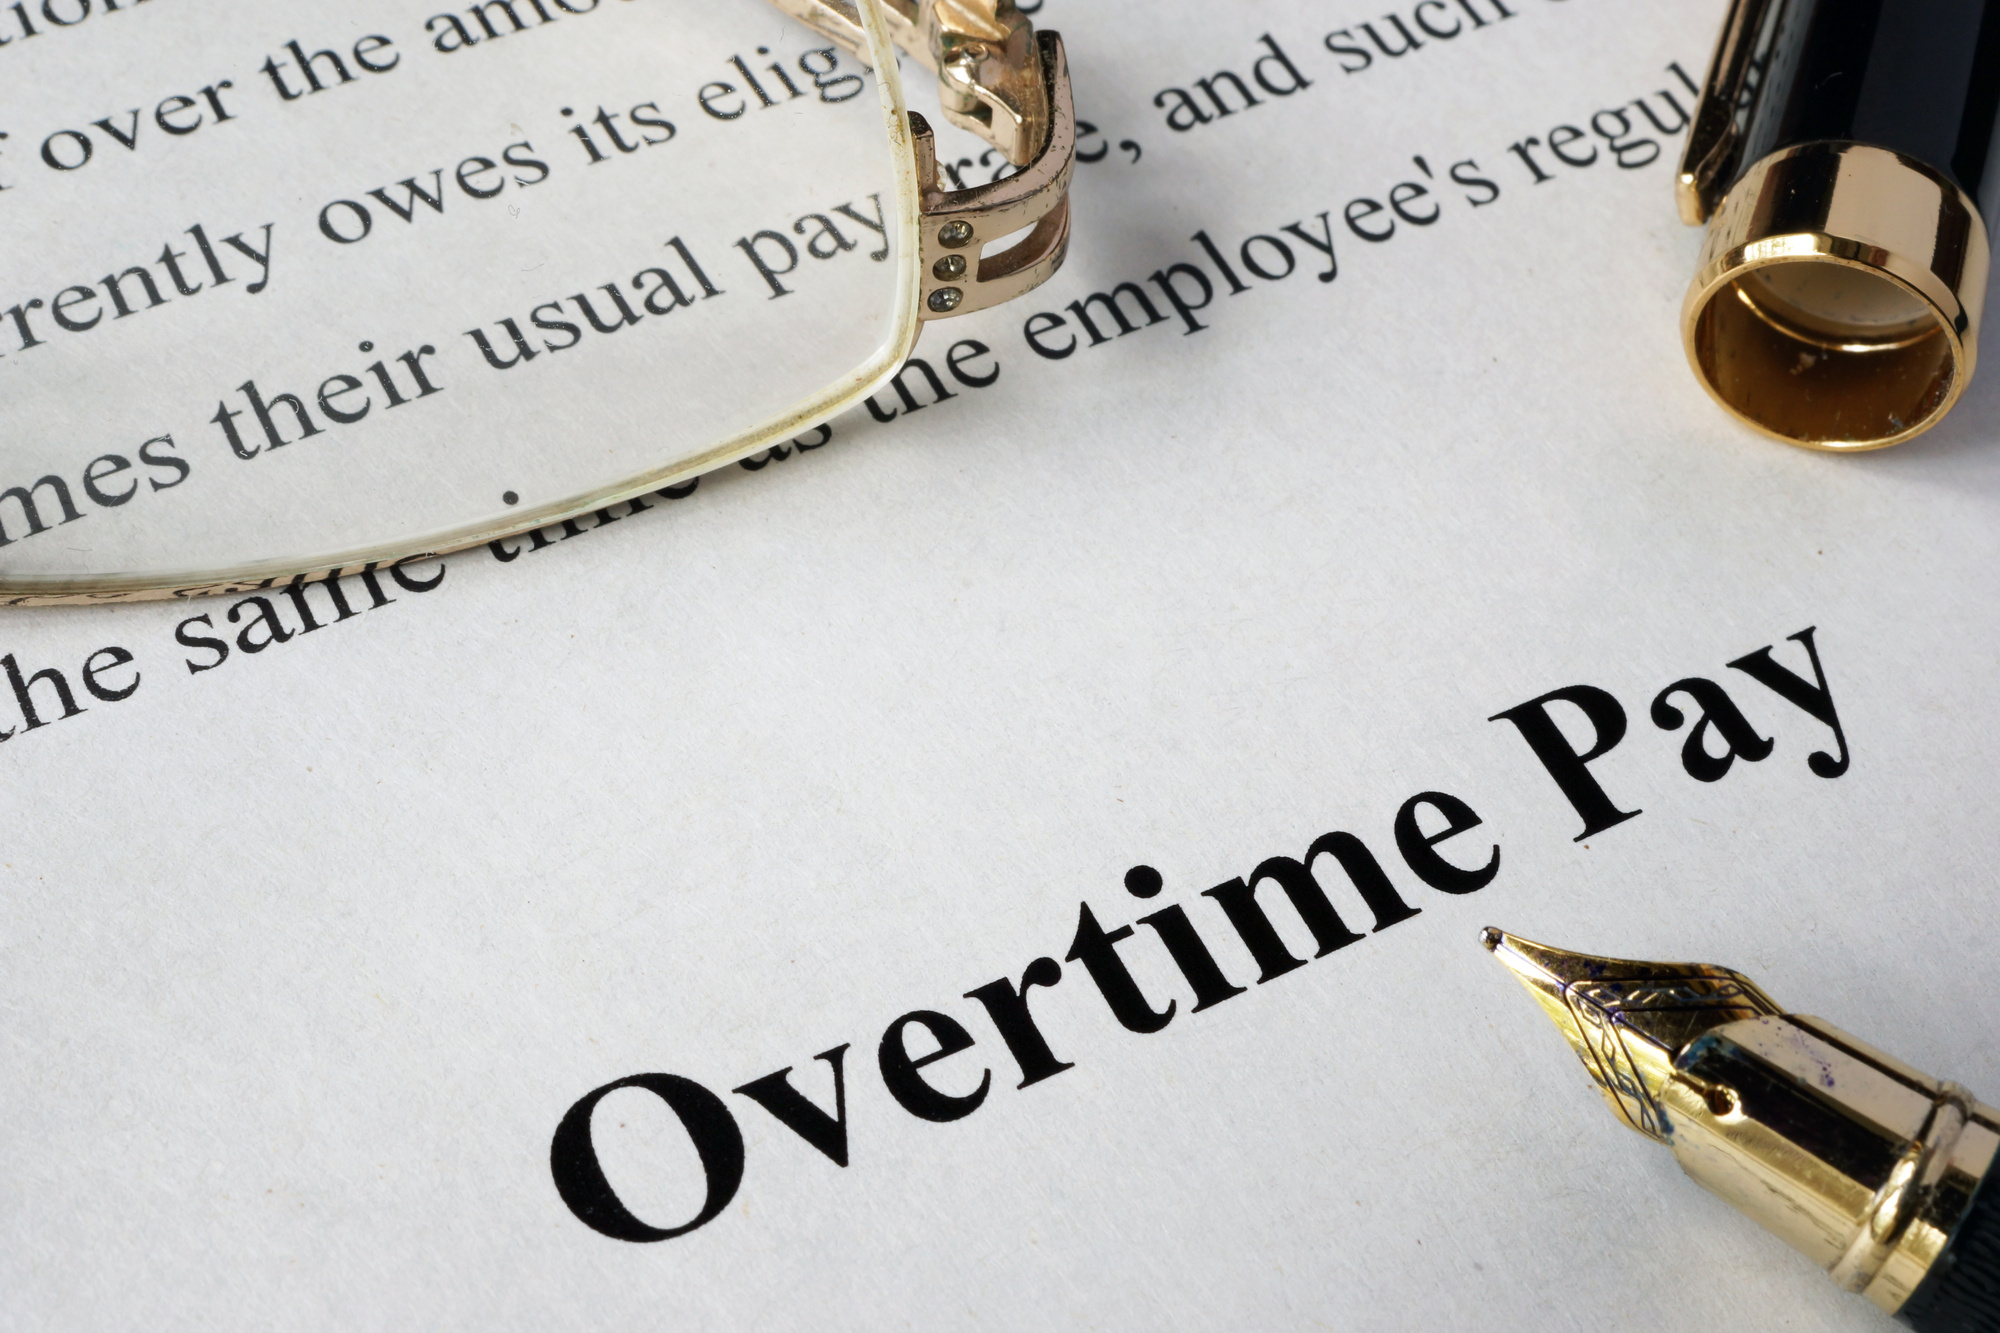 overtime pay